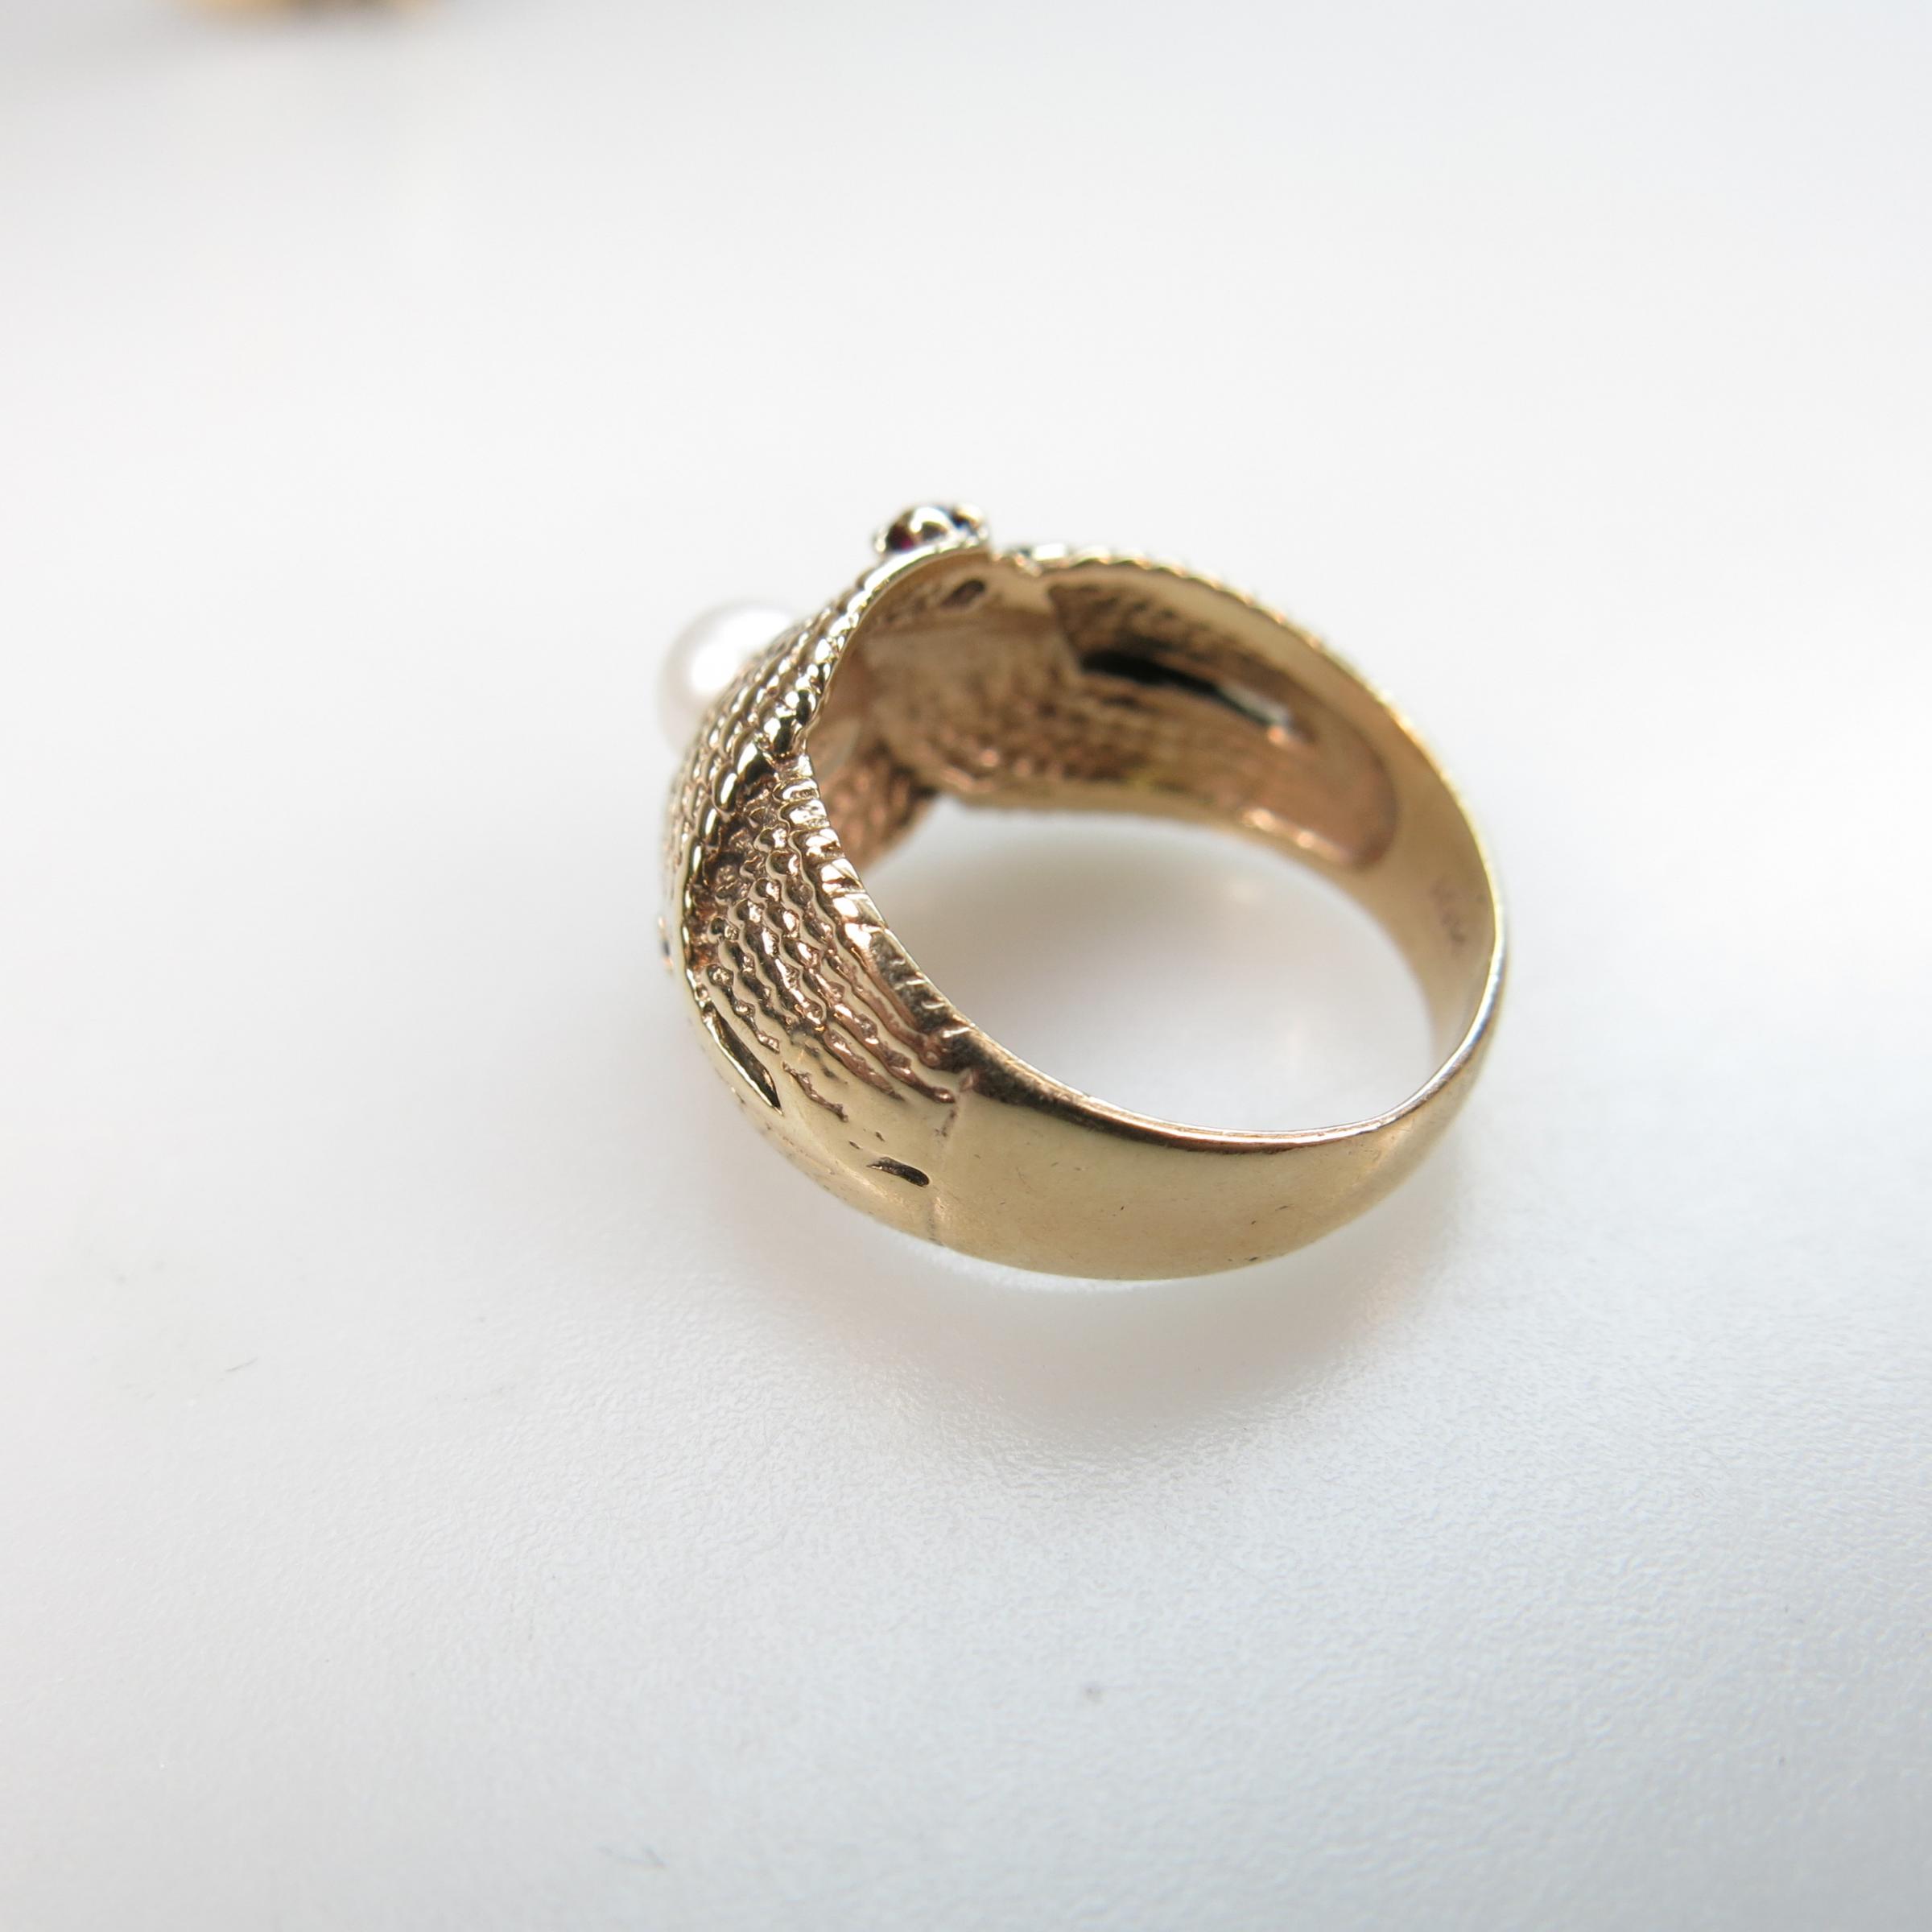 1 x 14k & Silver And 1 x 10k Yellow Gold Rings